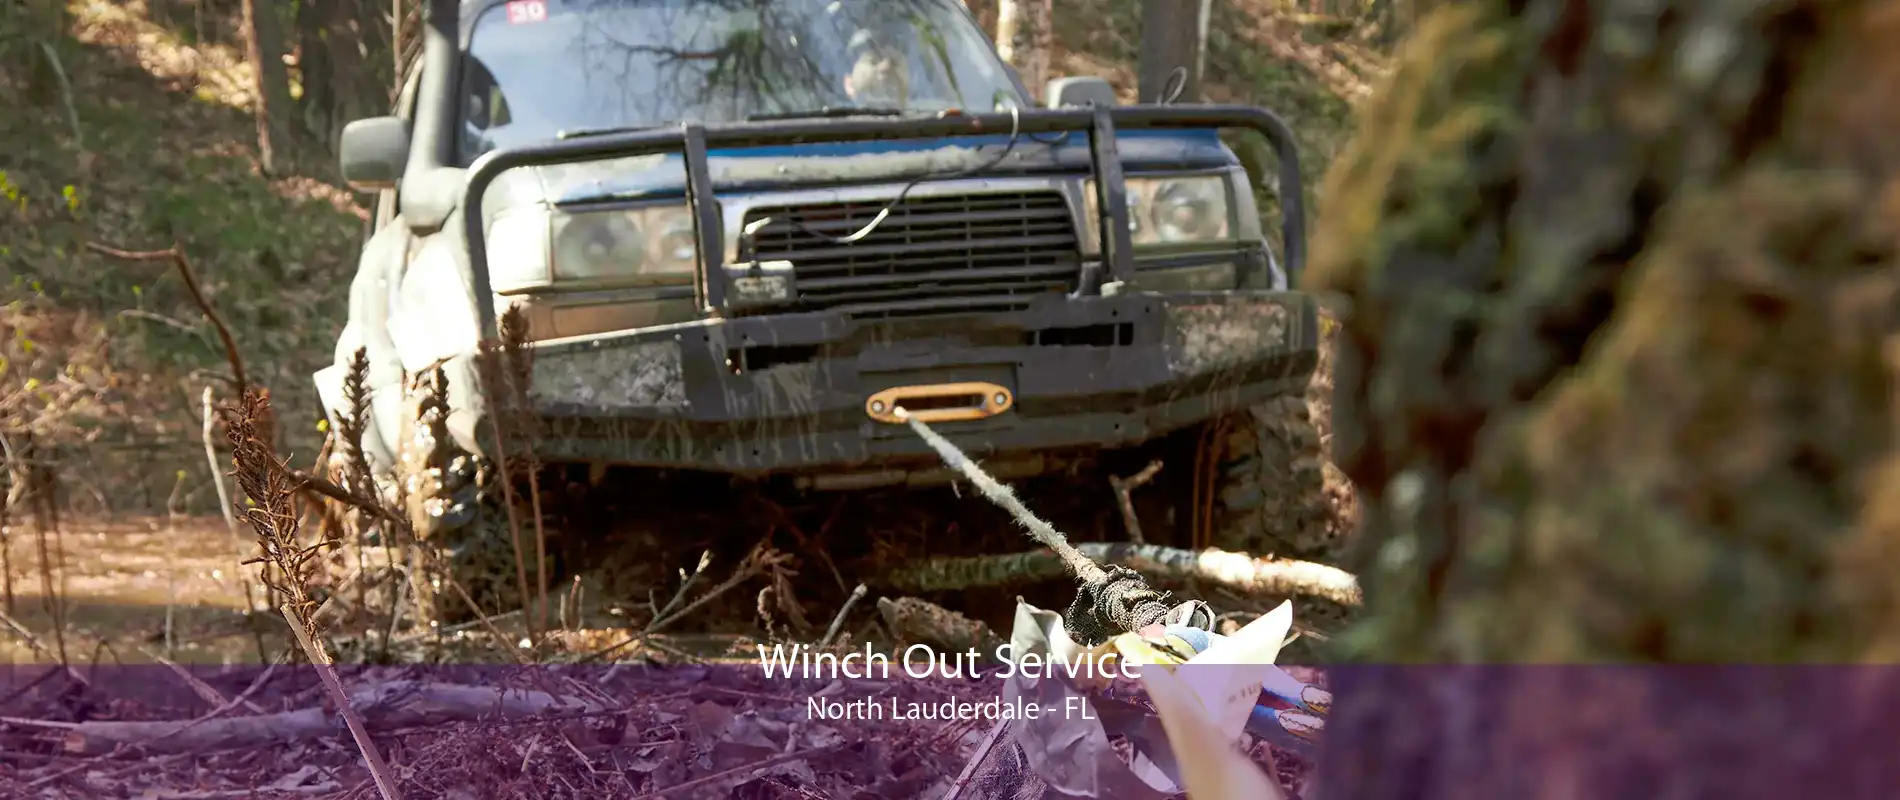 Winch Out Service North Lauderdale - FL